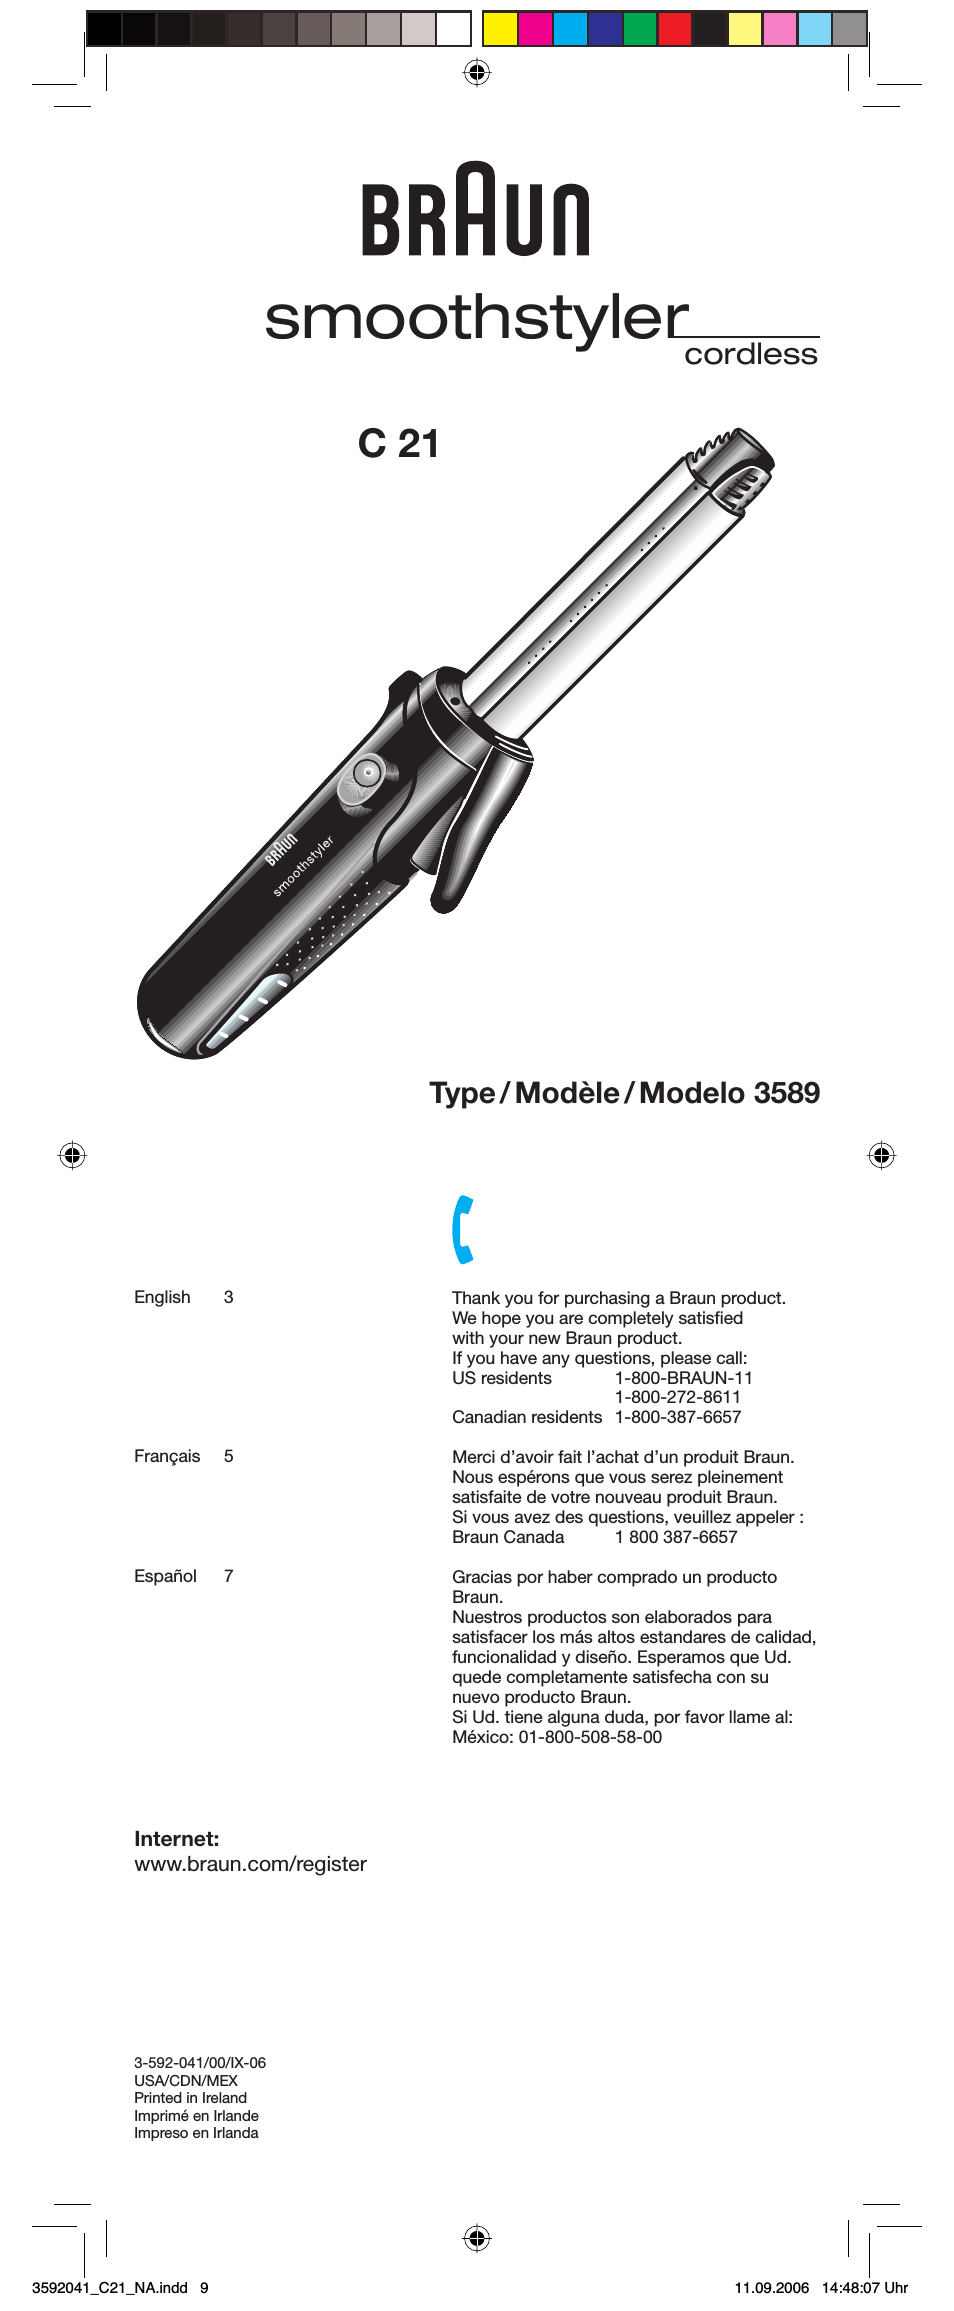 C21 smoothstyler cordless